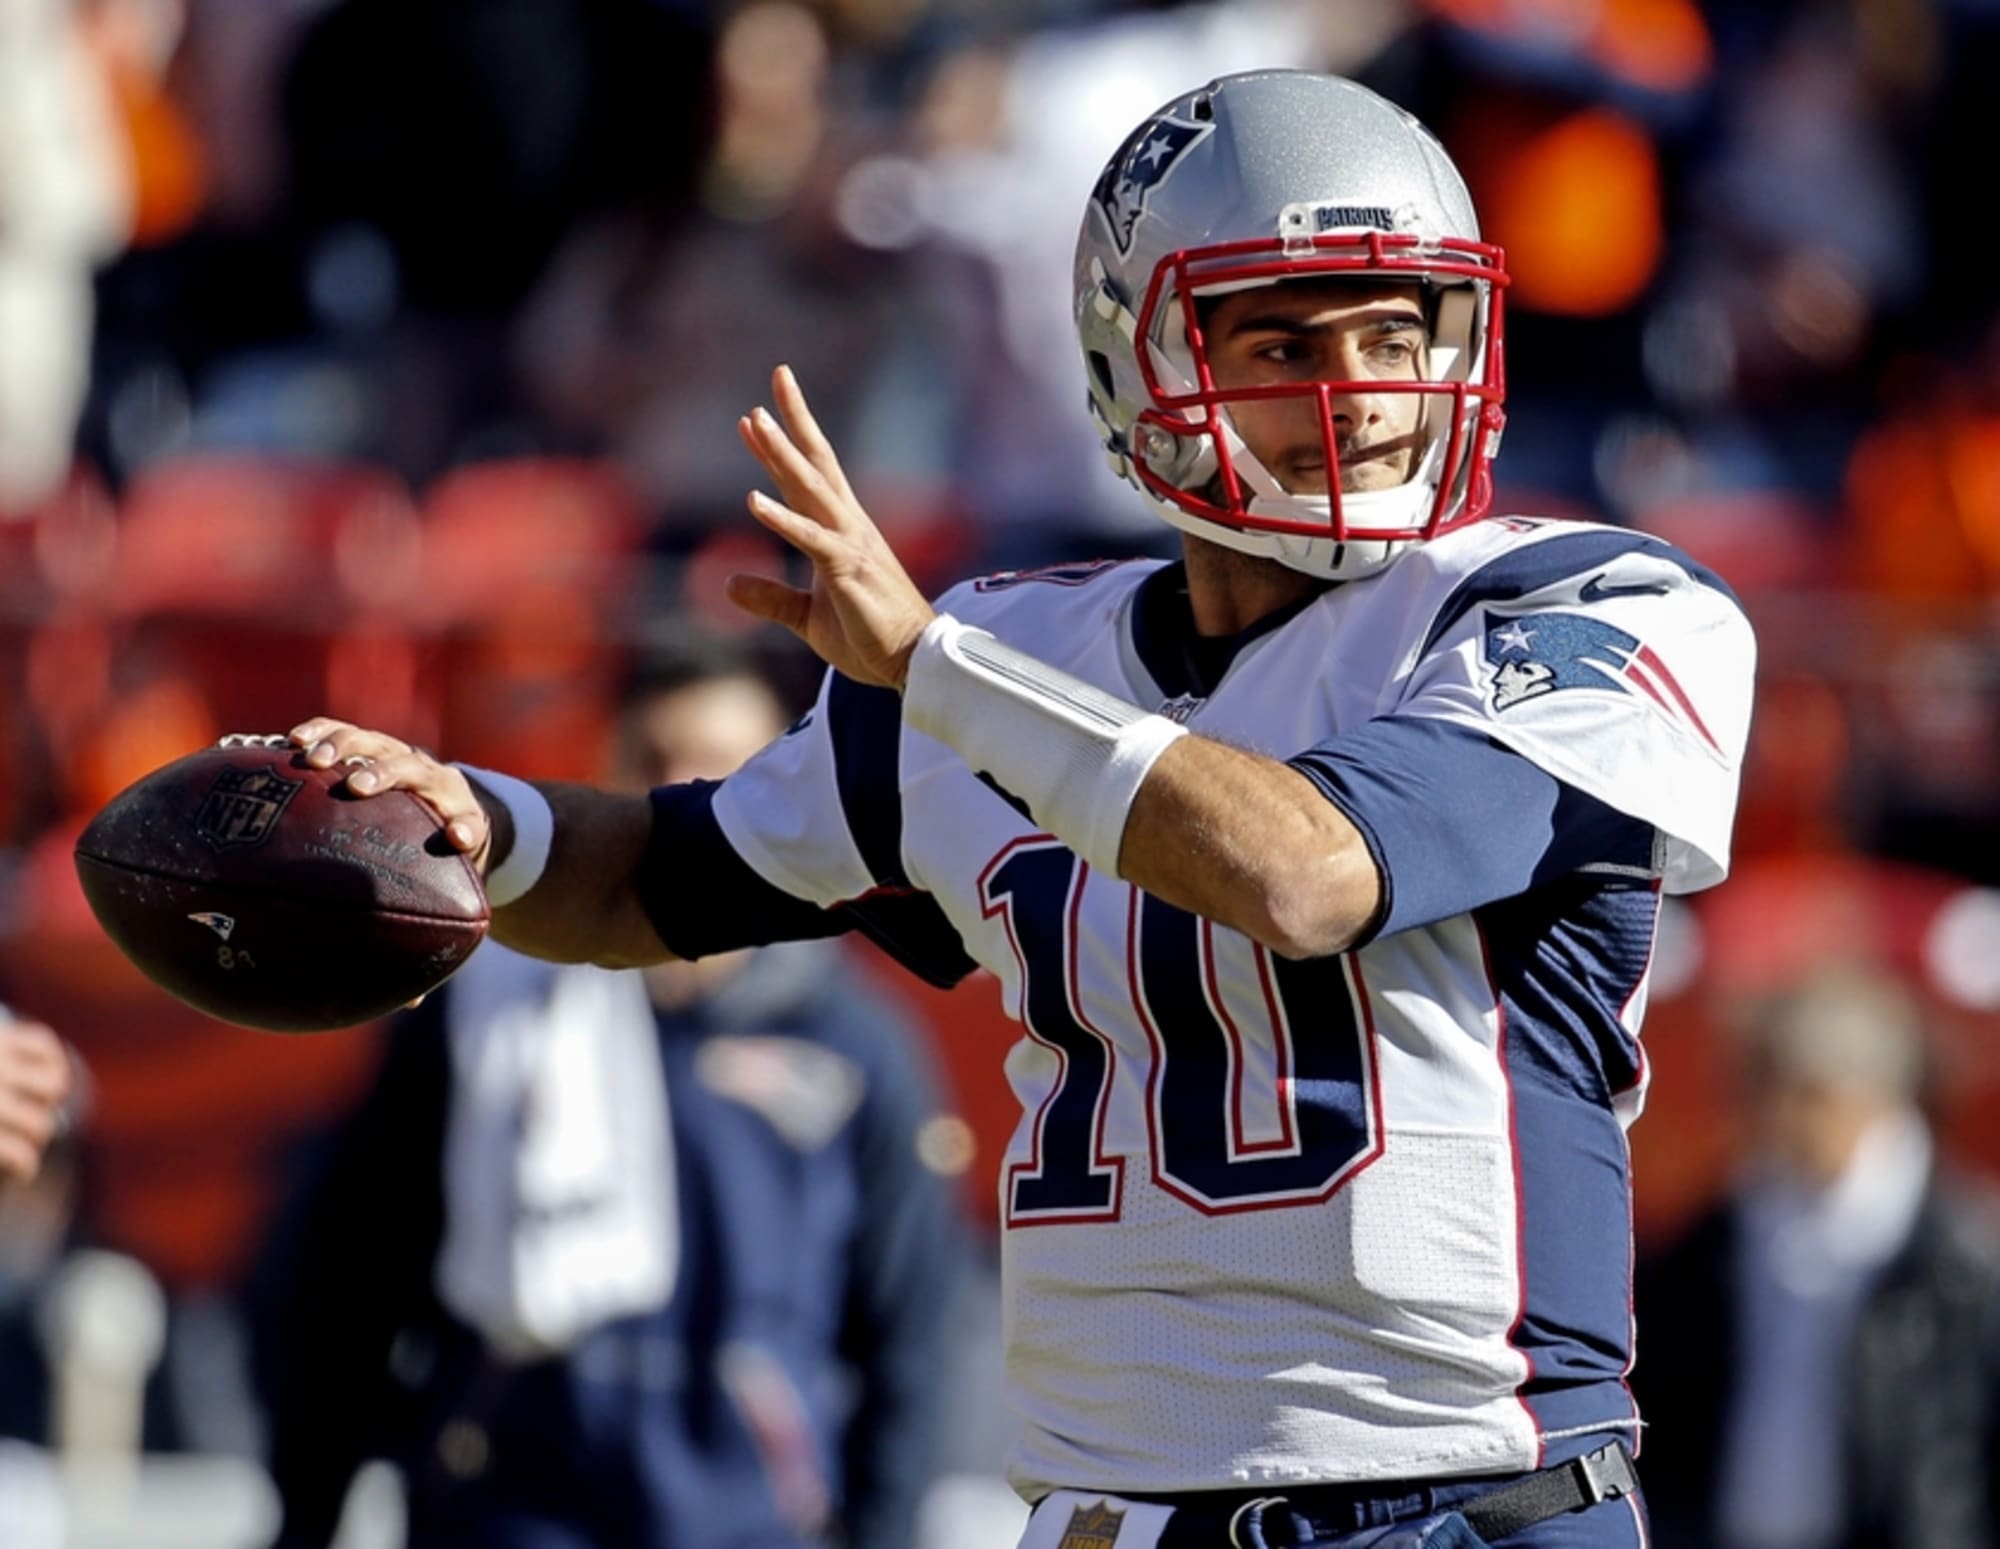 Patriots 'Are Not Expected' to Trade Jimmy Garoppolo, Report Says